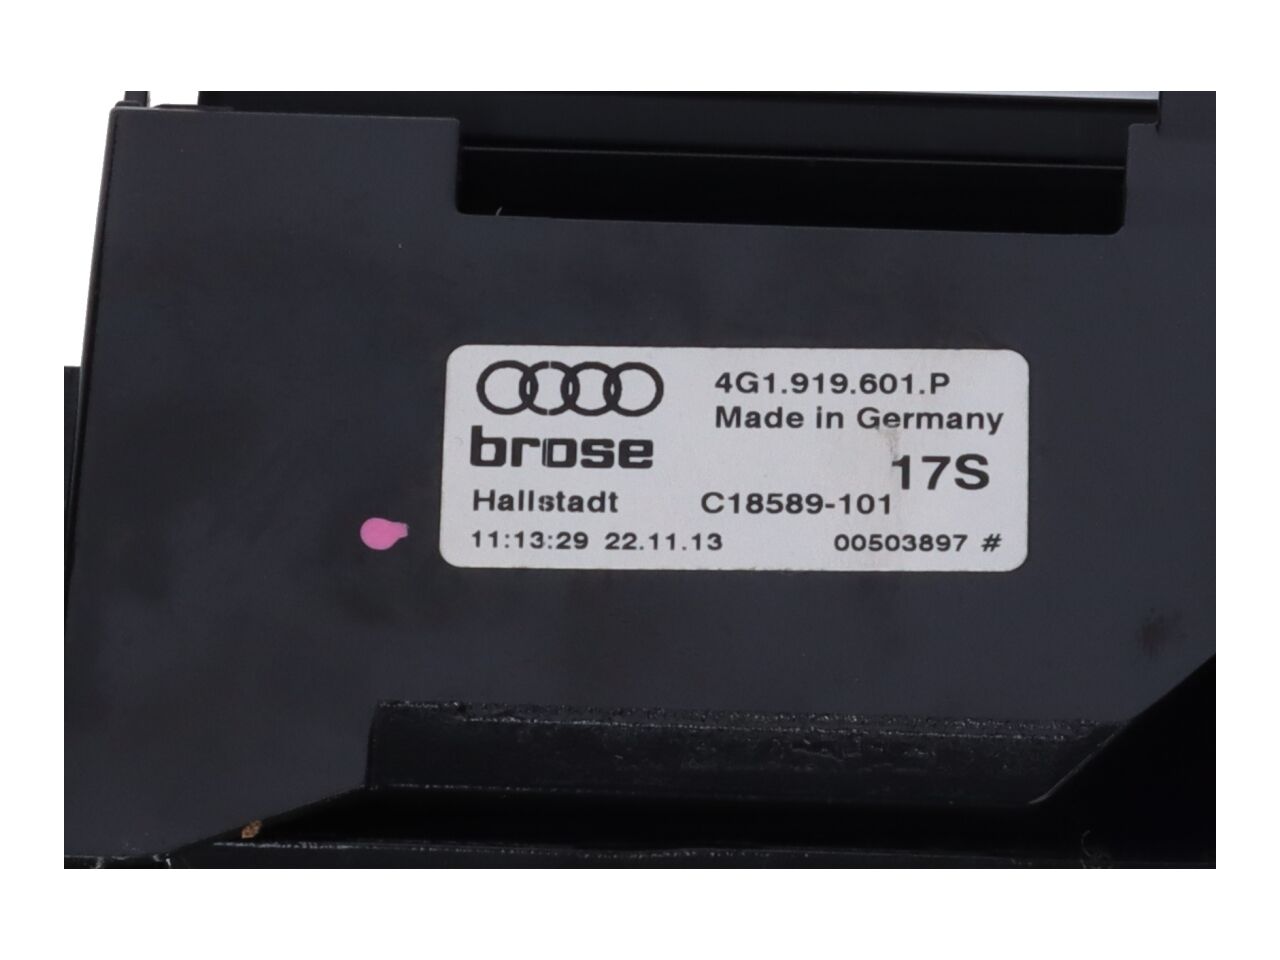 Display AUDI A7 Sportback (4G) RS7 quattro  412 kW  560 PS (10.2013-04.2018)